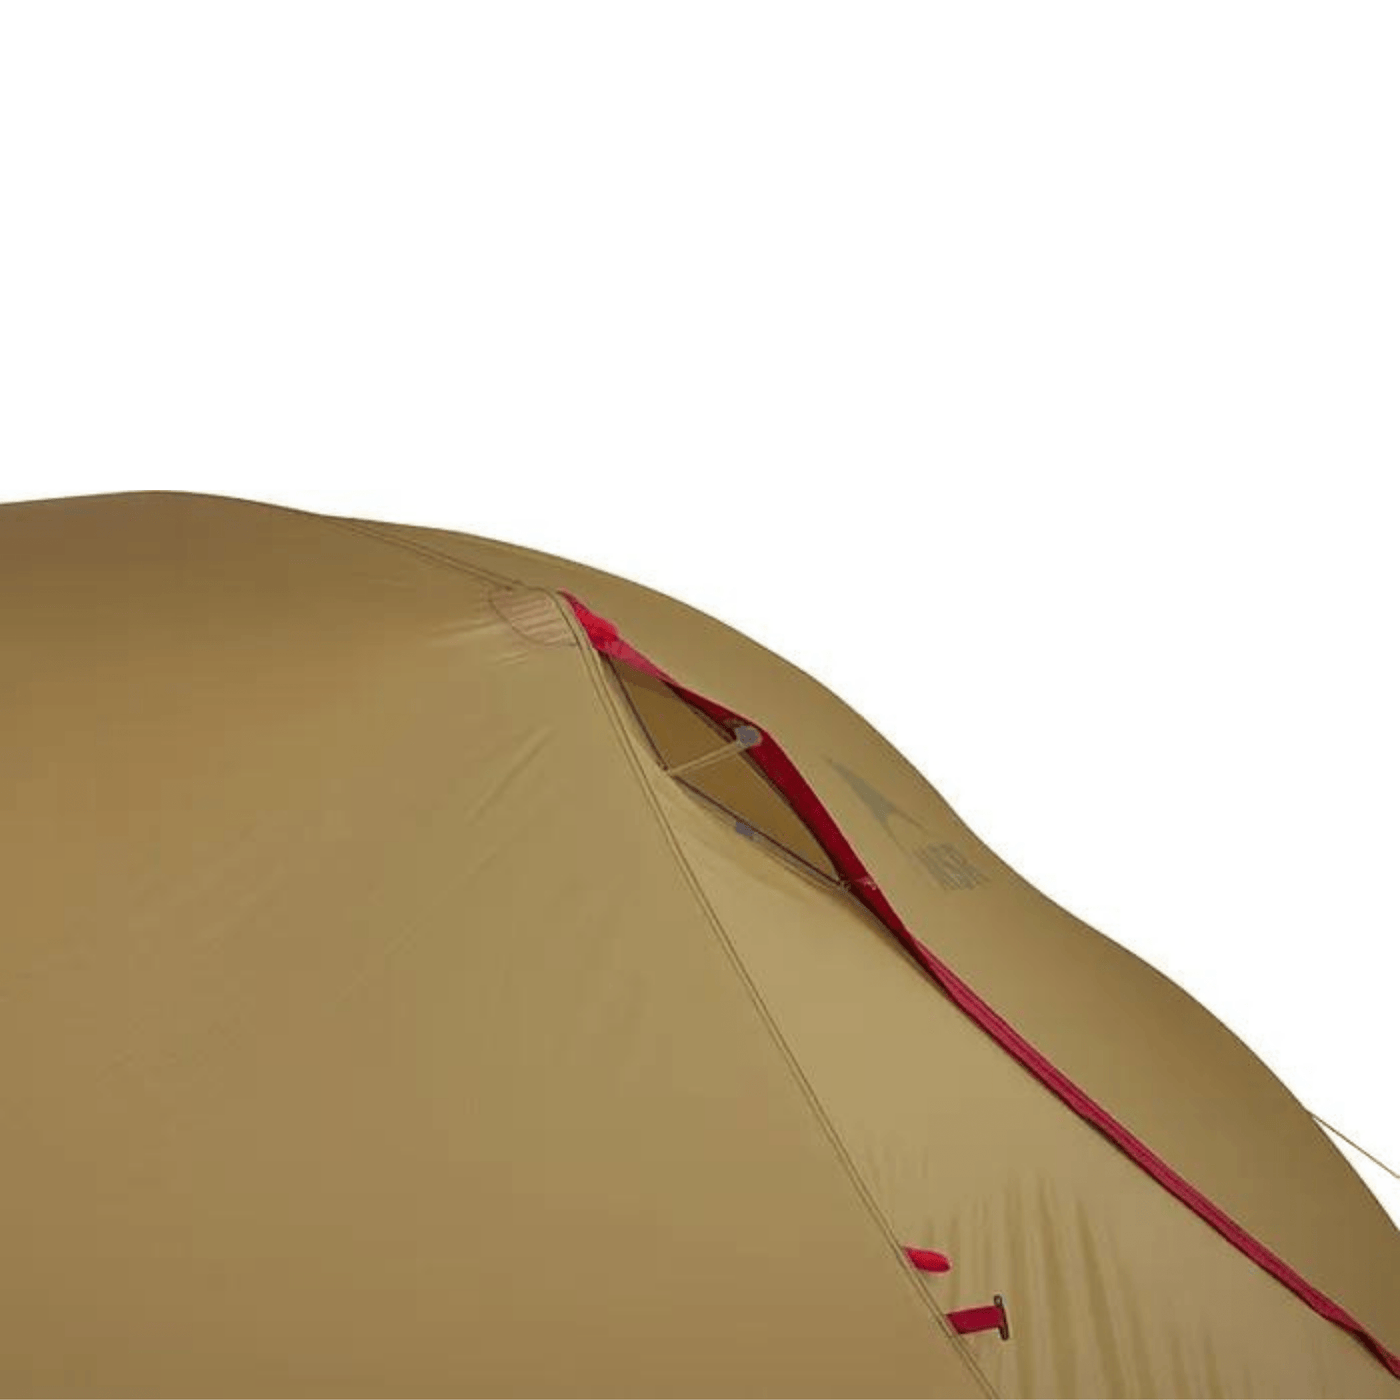 MSR Hubba Hubba 3 '22 | 3 Person Backcountry Tents | Further Faster Christchurch NZ